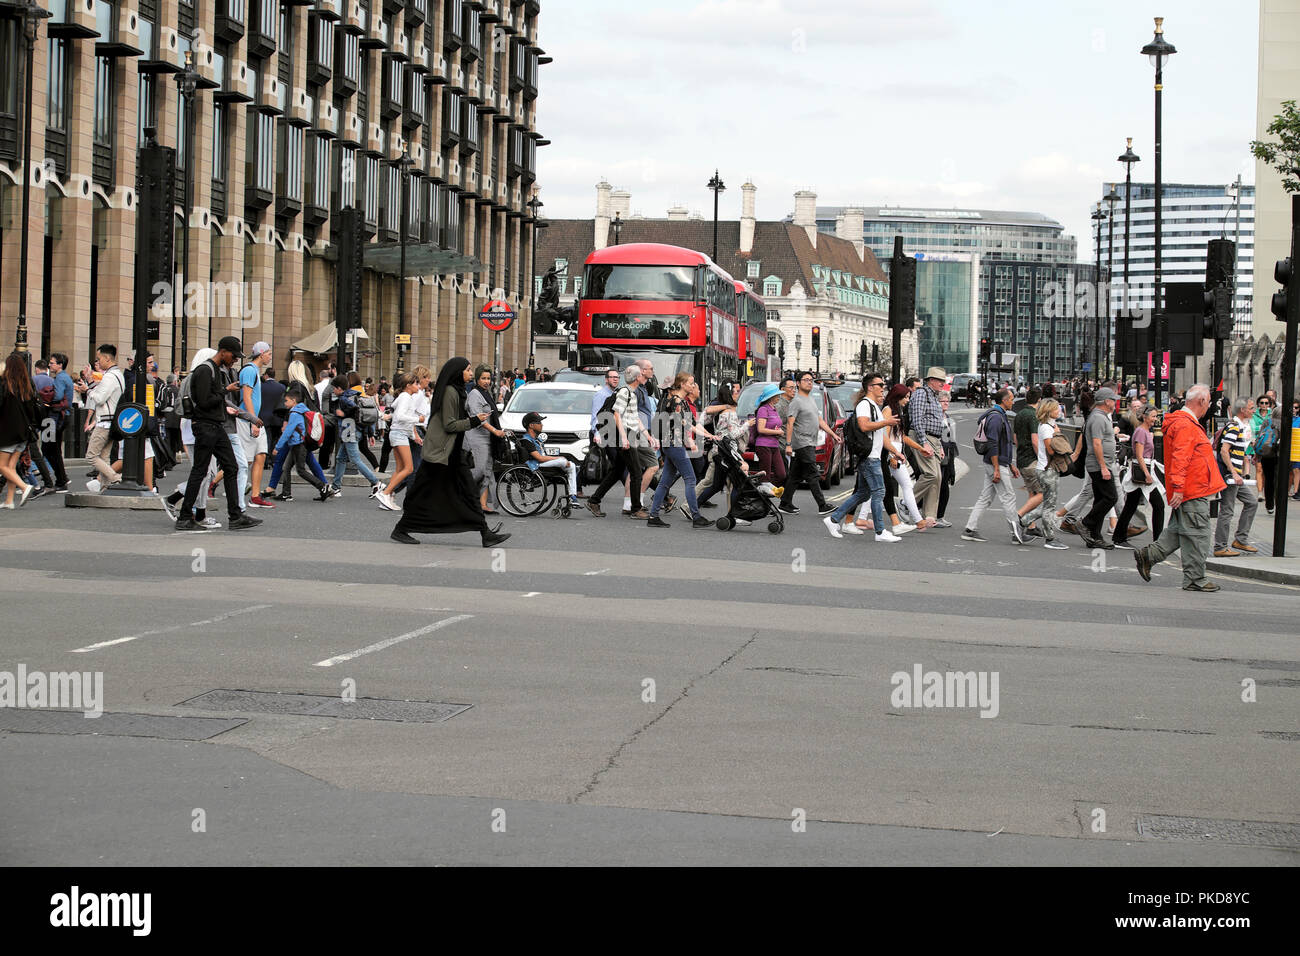 Pedestrians and tourists cross the road at Bridge Street traffic lights pedestrian crossing outside the Houses of Parliament Westminster London UK Stock Photo